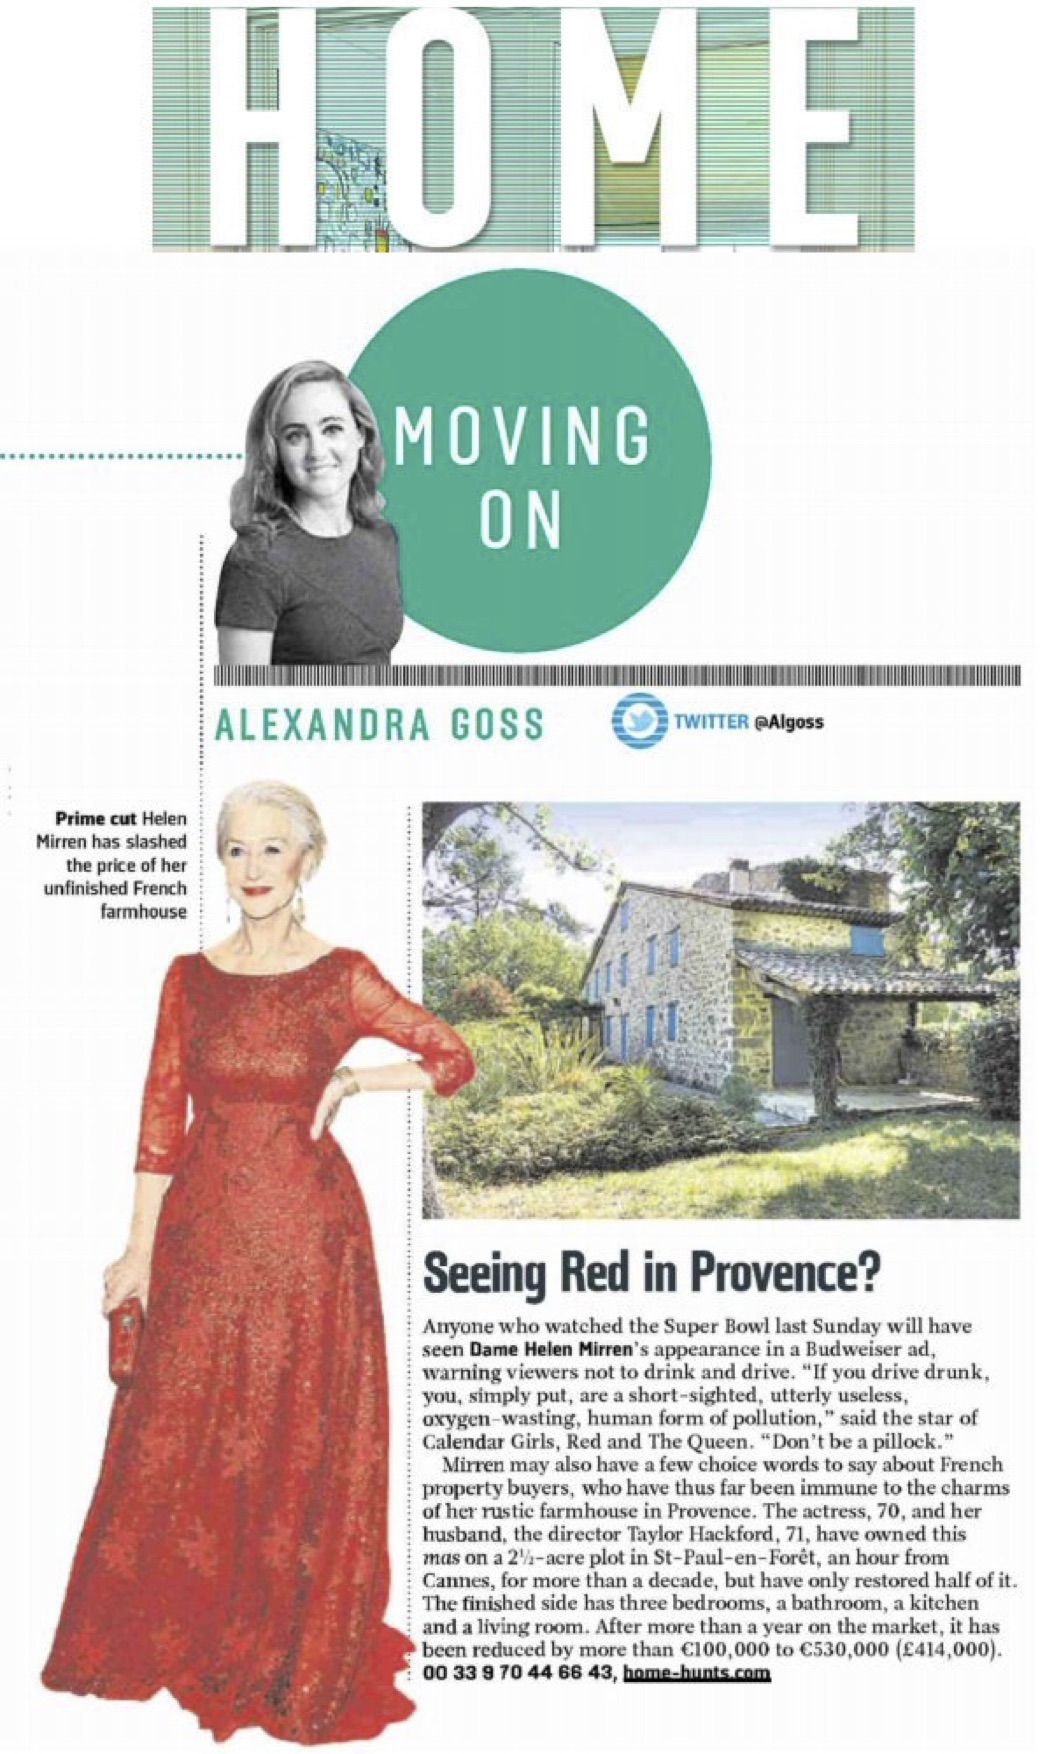 The Sunday Times – Dame Helen Mirren’s property in Provence